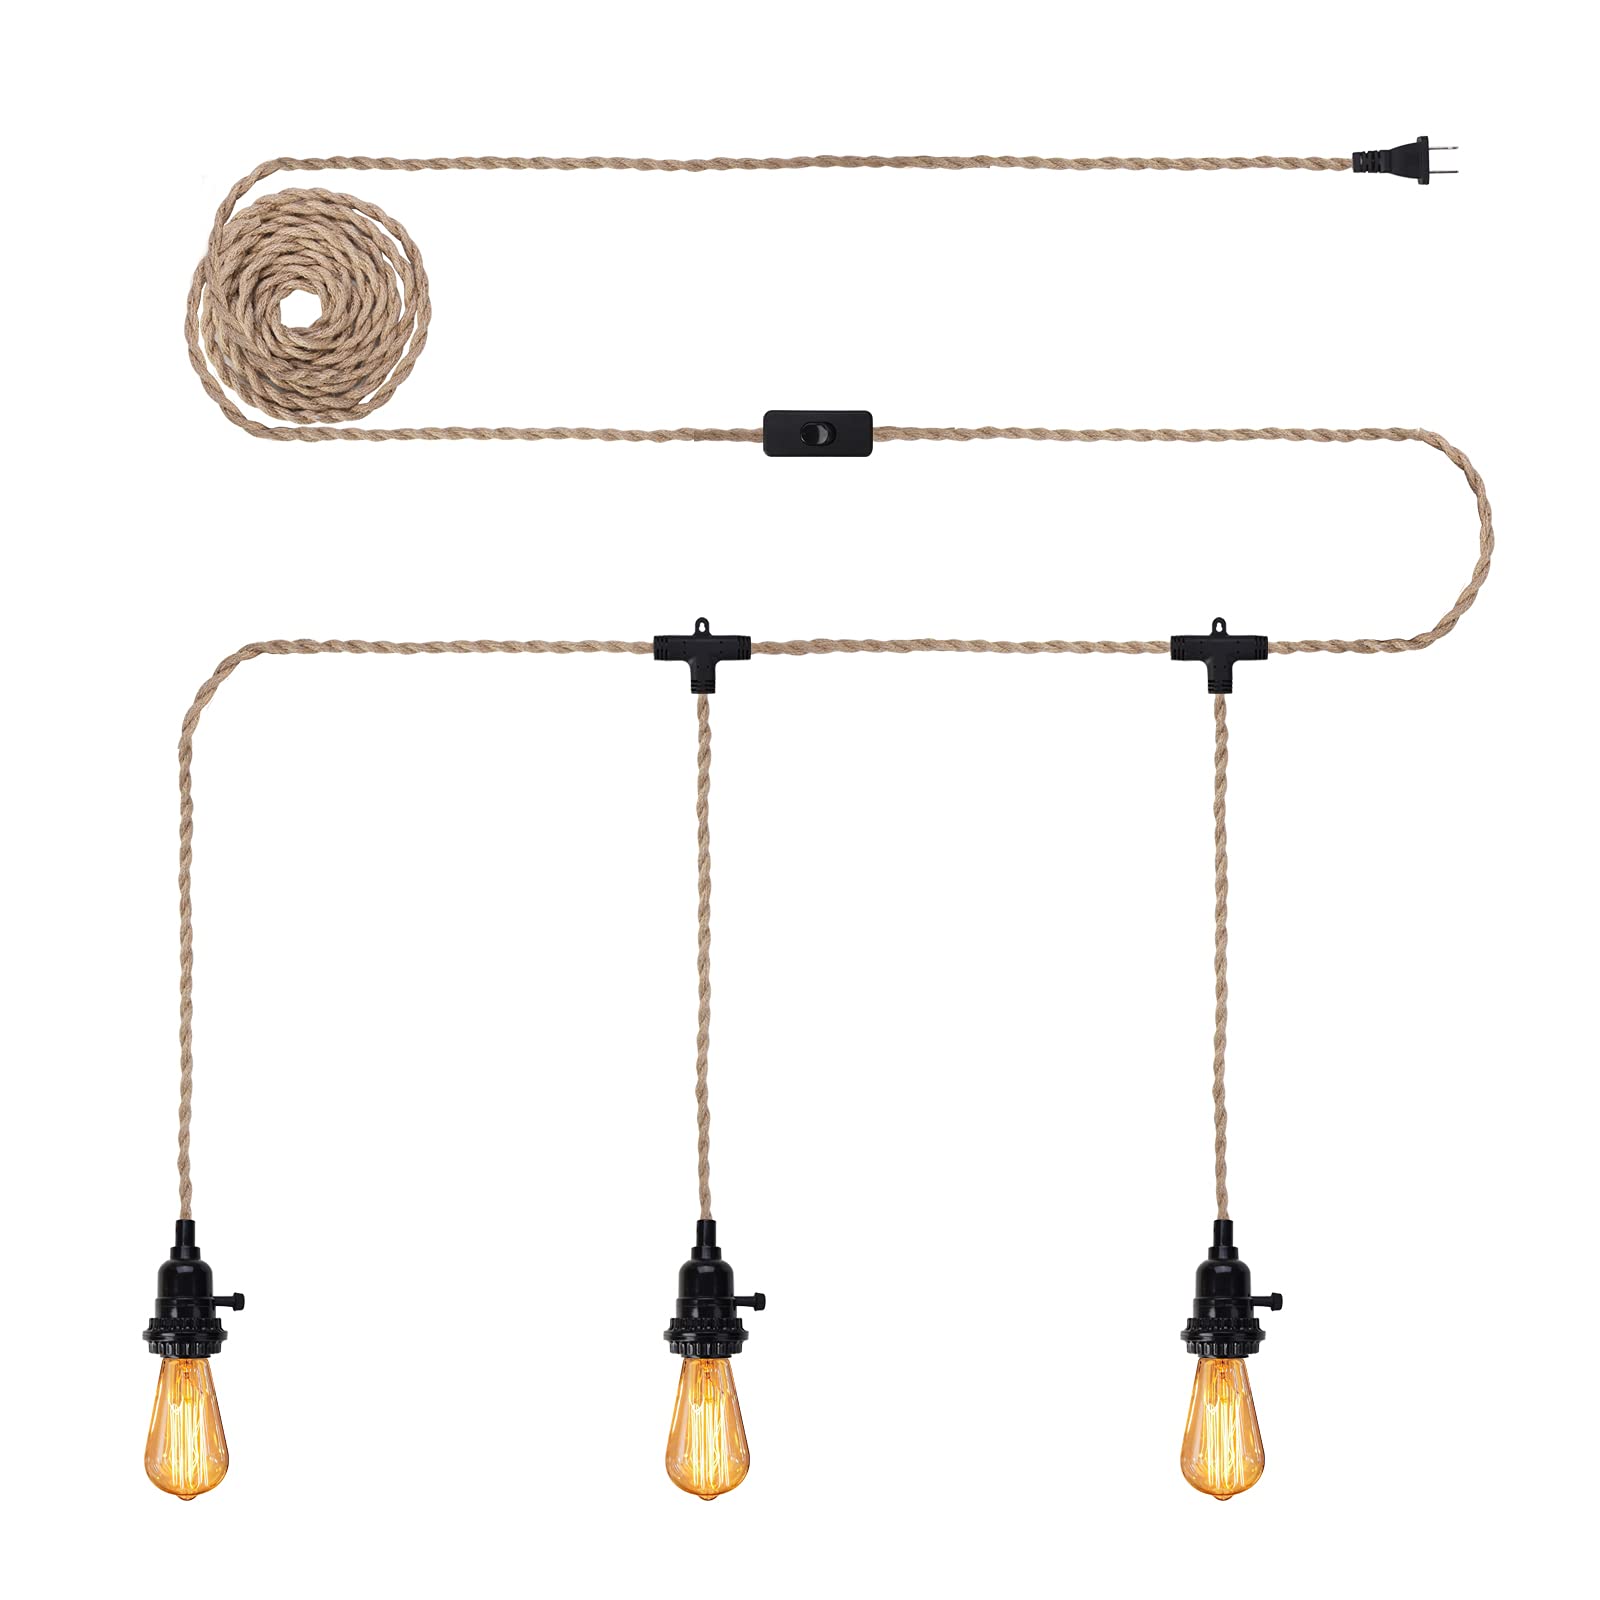 Rope Pendant Light Cord Kit with Plug & Switch - Triple Sockets, 29 FT, Vintage (Bulb not Included )